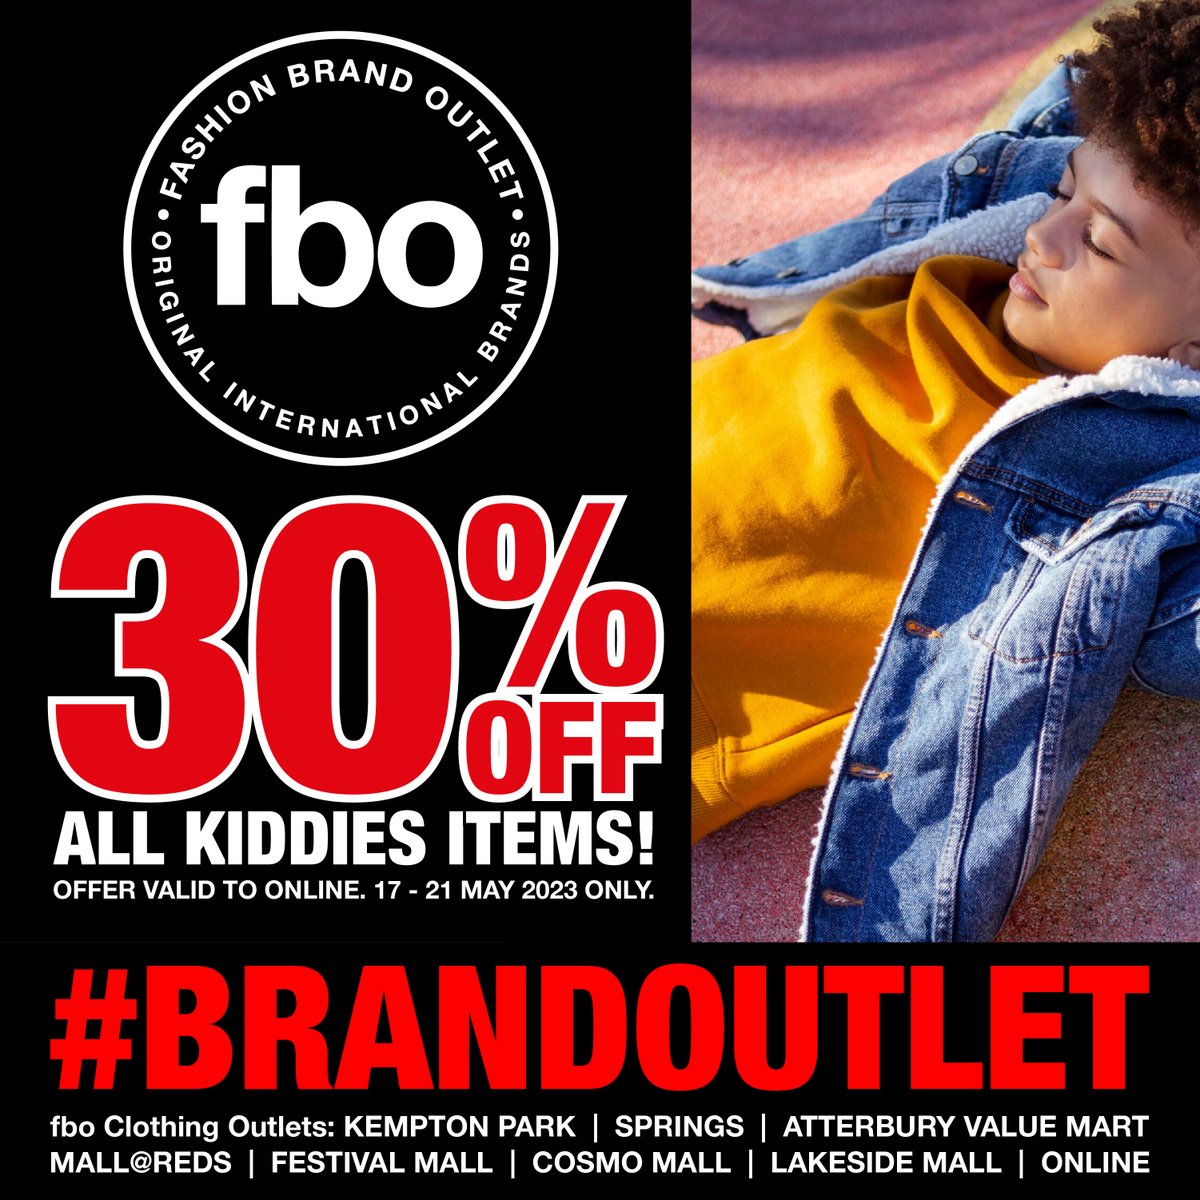 Remember, when it comes to keeping your kids warm and stylish, we've got you covered! 
#shopping #trend #trending #trendingnow #menswear #brandoutlet #ladieswear #fashion #style #brandedwear #sale #kidswear #outletshopping #winterfashion #FBO #kids #kidsfashiontrends #outletsale